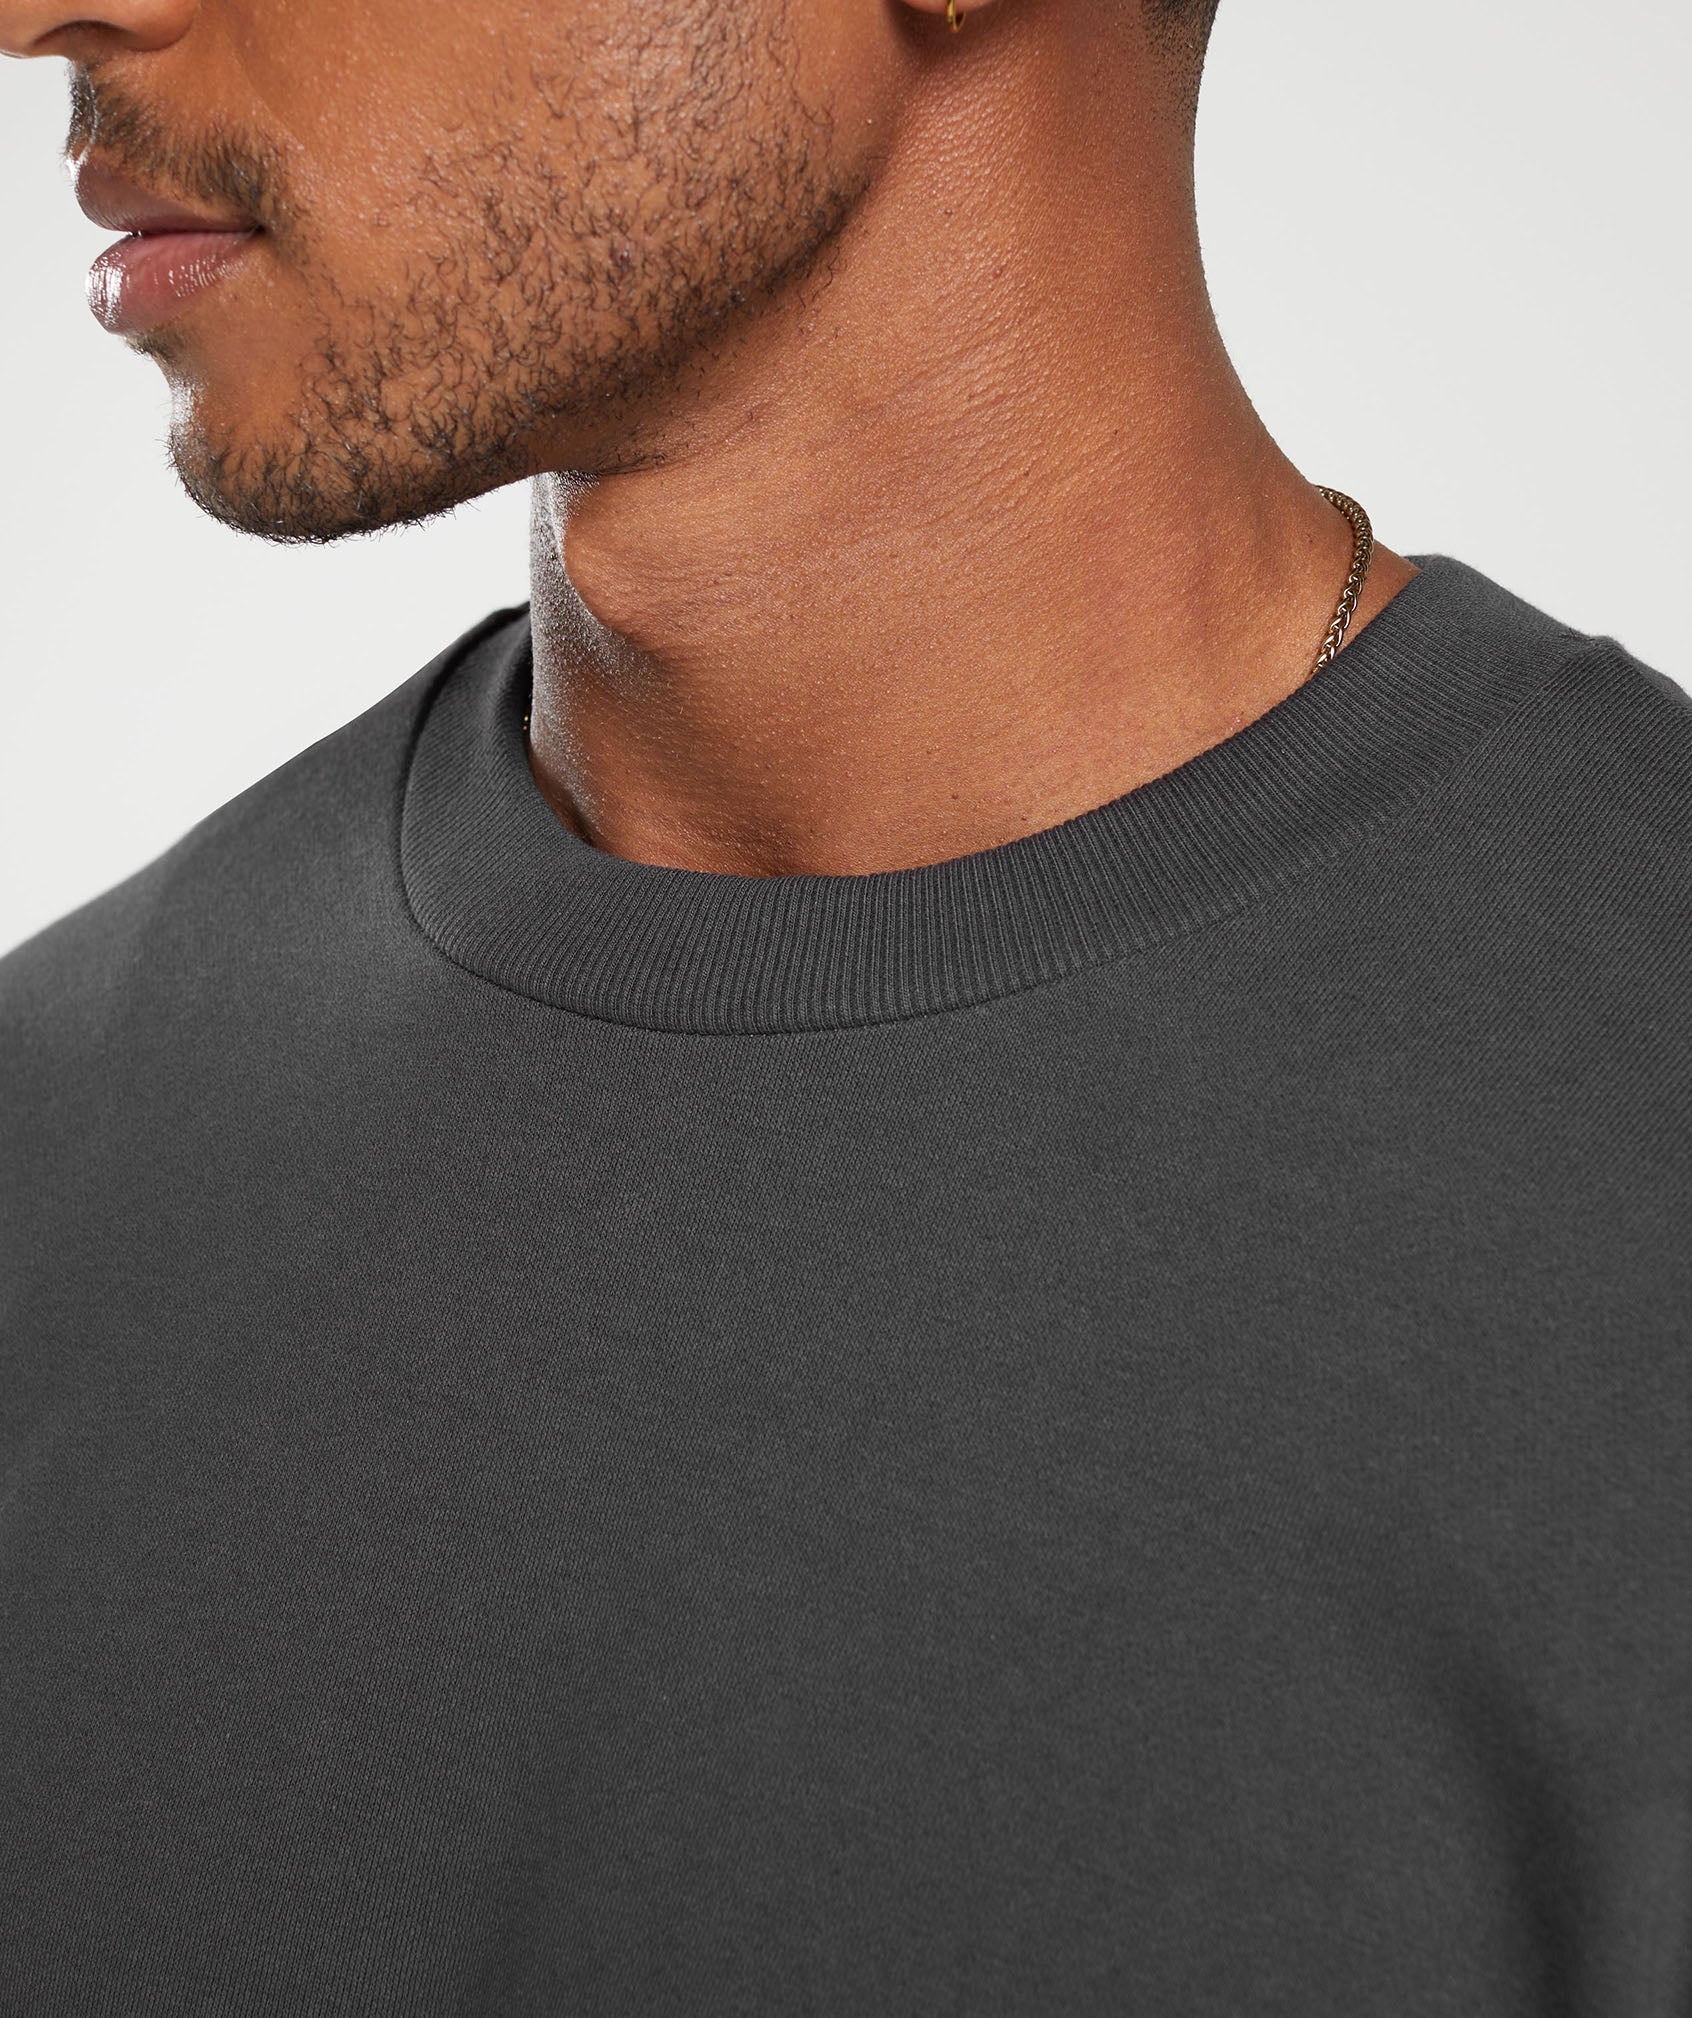 Rest Day Essential Crew in Onyx Grey - view 5